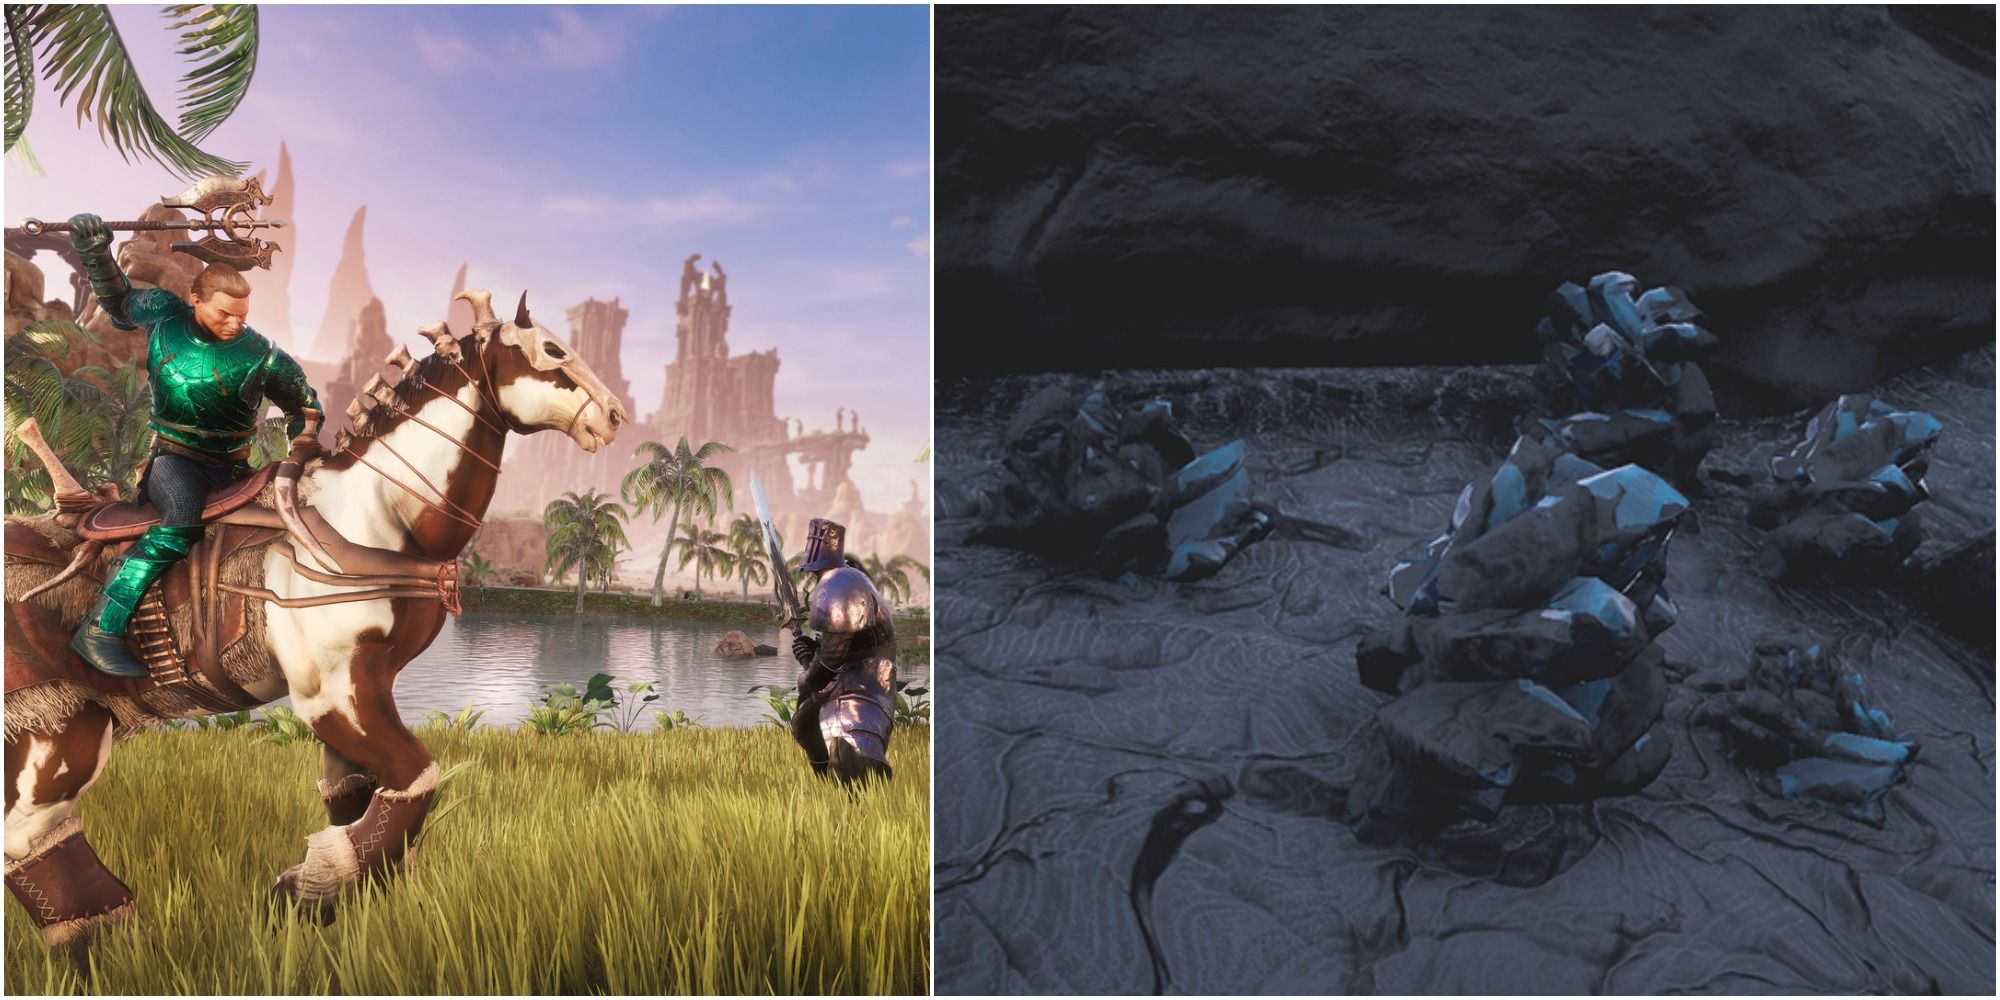 Image 1 showing a player on a horse with an axe. Image 2 showing Obsidian Mines containing Raw Ash. 